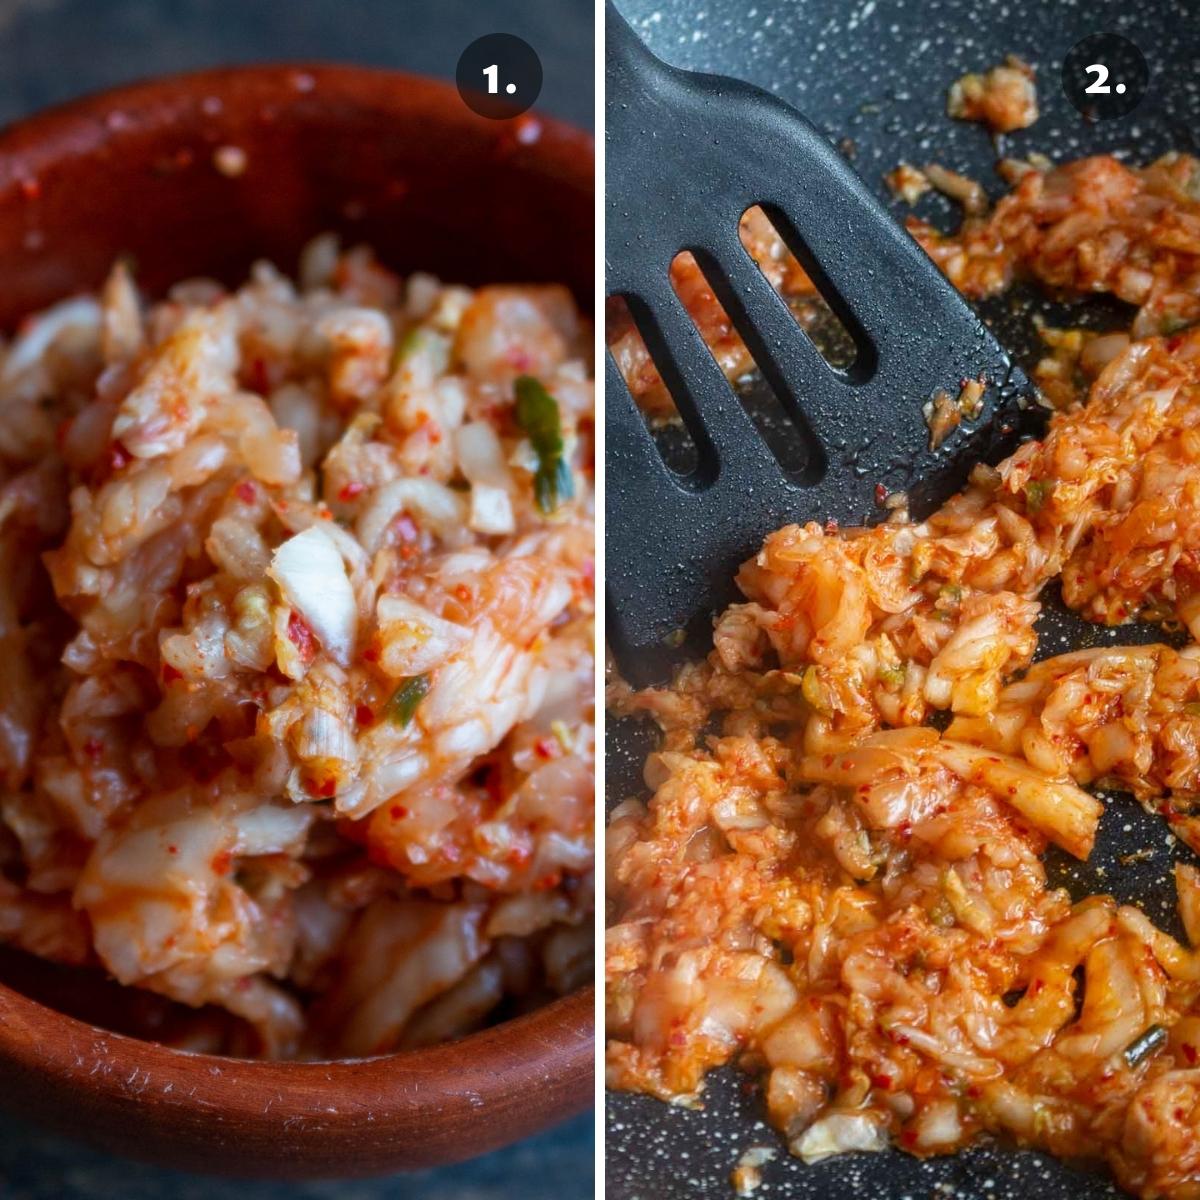 Bowl of raw chopped kimchi on left and cooking kimchi on the right.